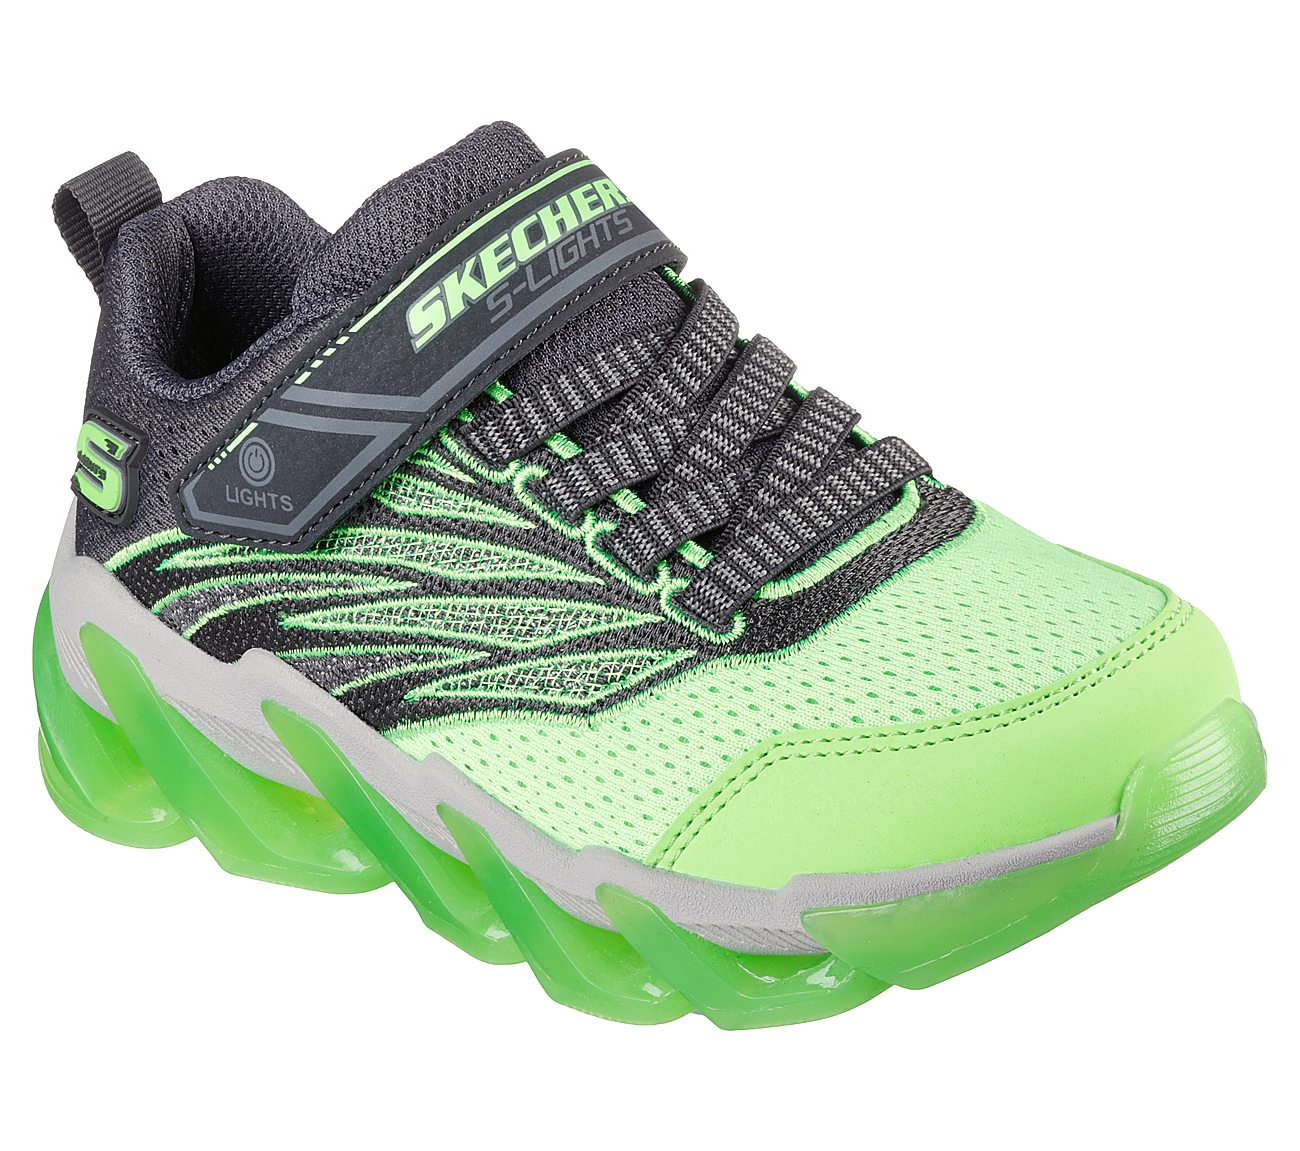 MEGA-SURGE - NEZCO, CHARCOAL/LIME Footwear Lateral View